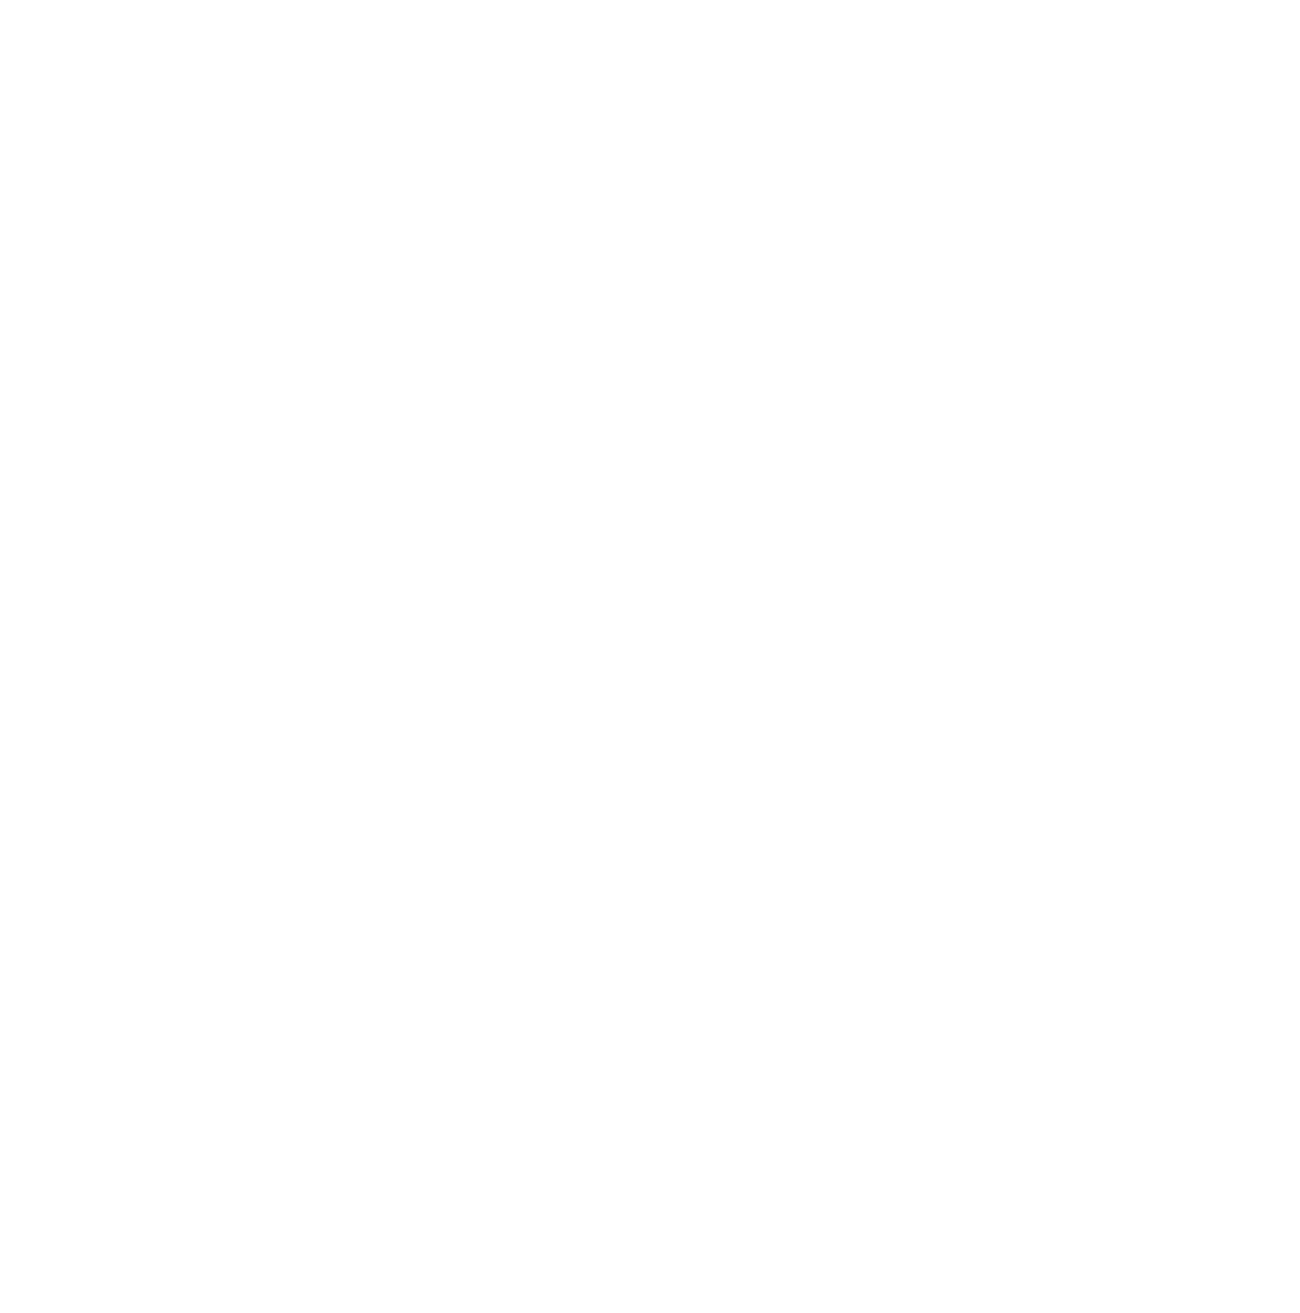 outline map of europe